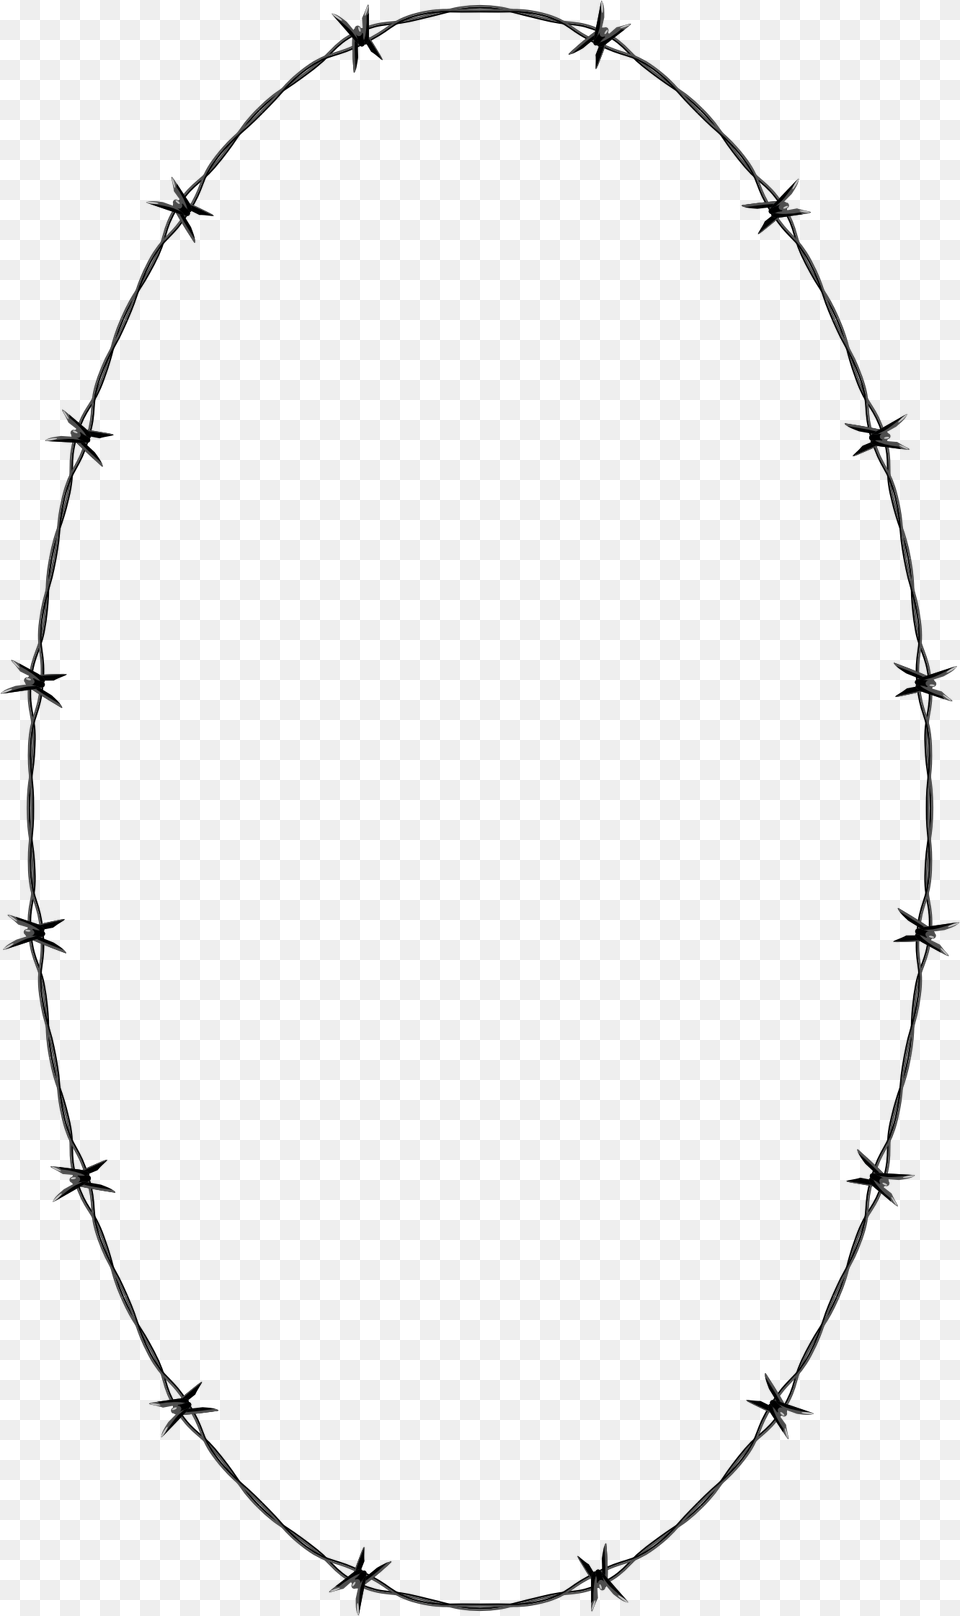 This Icons Design Of Barbed Wire Ellipse Frame, Oval Free Png Download